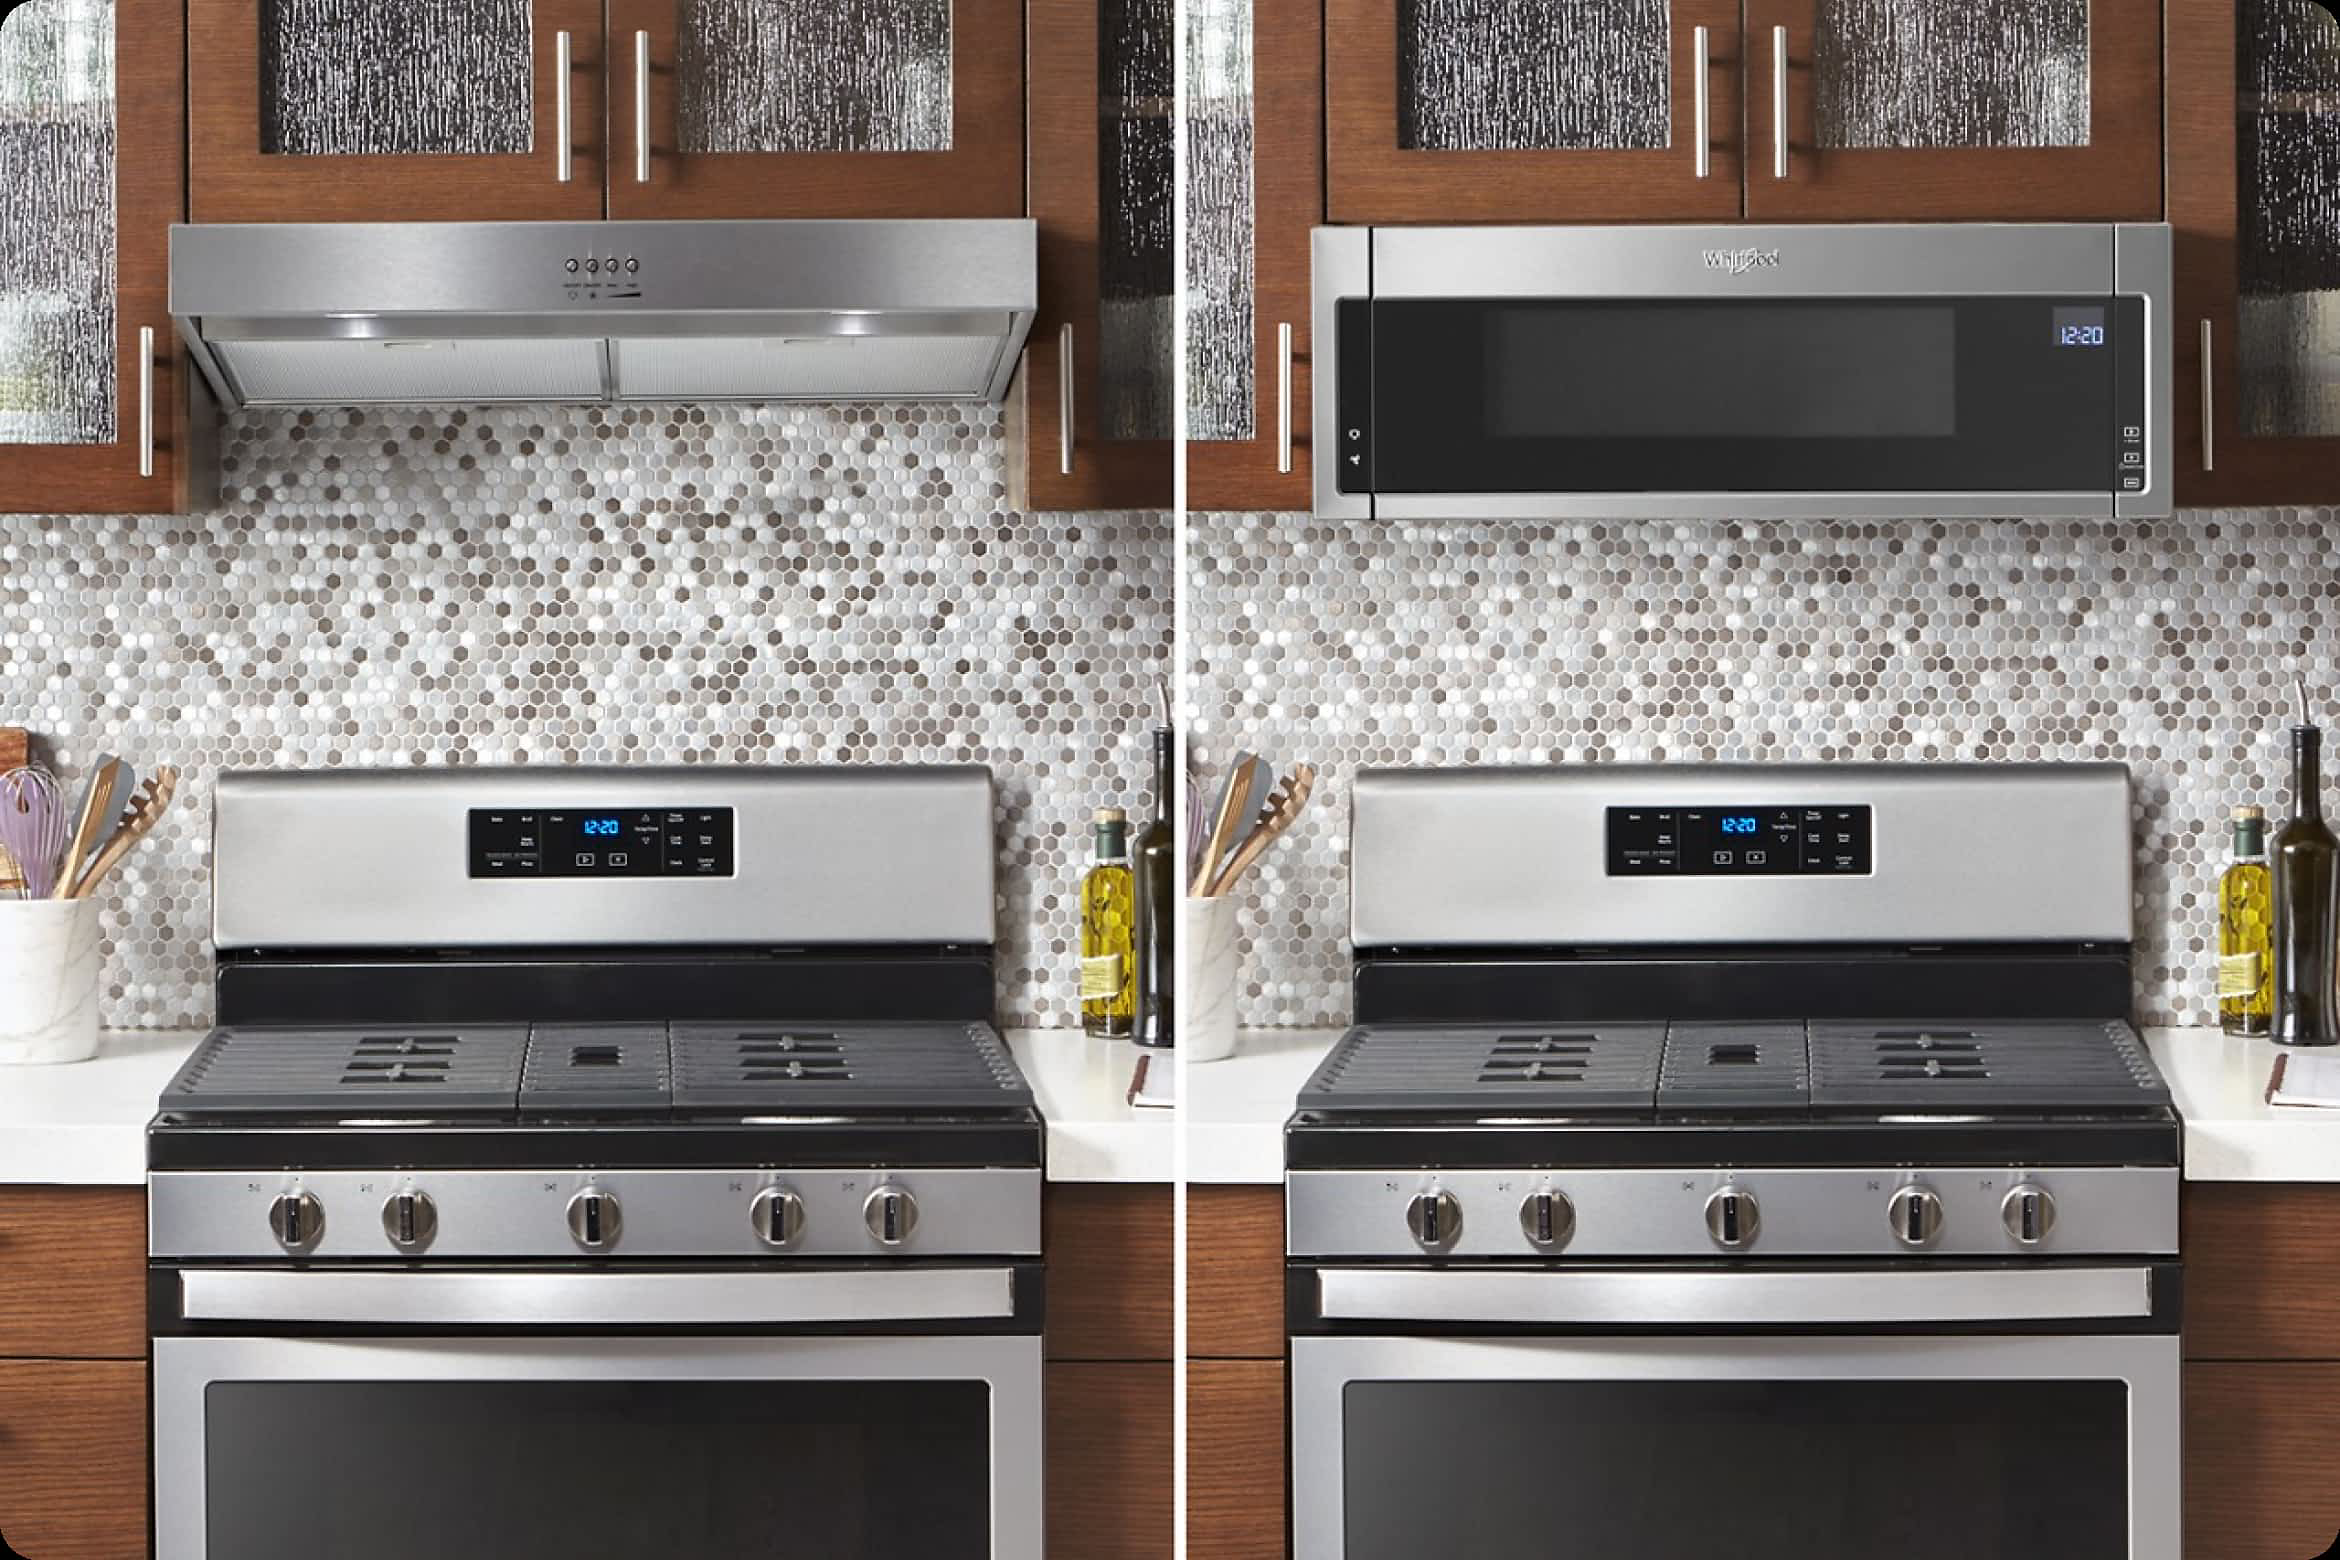 A side-by-side image showing a Whirlpool® Range Hood compared to a Whirlpool® Low Profile Over-The Range Combination Microwave & Vent Hood